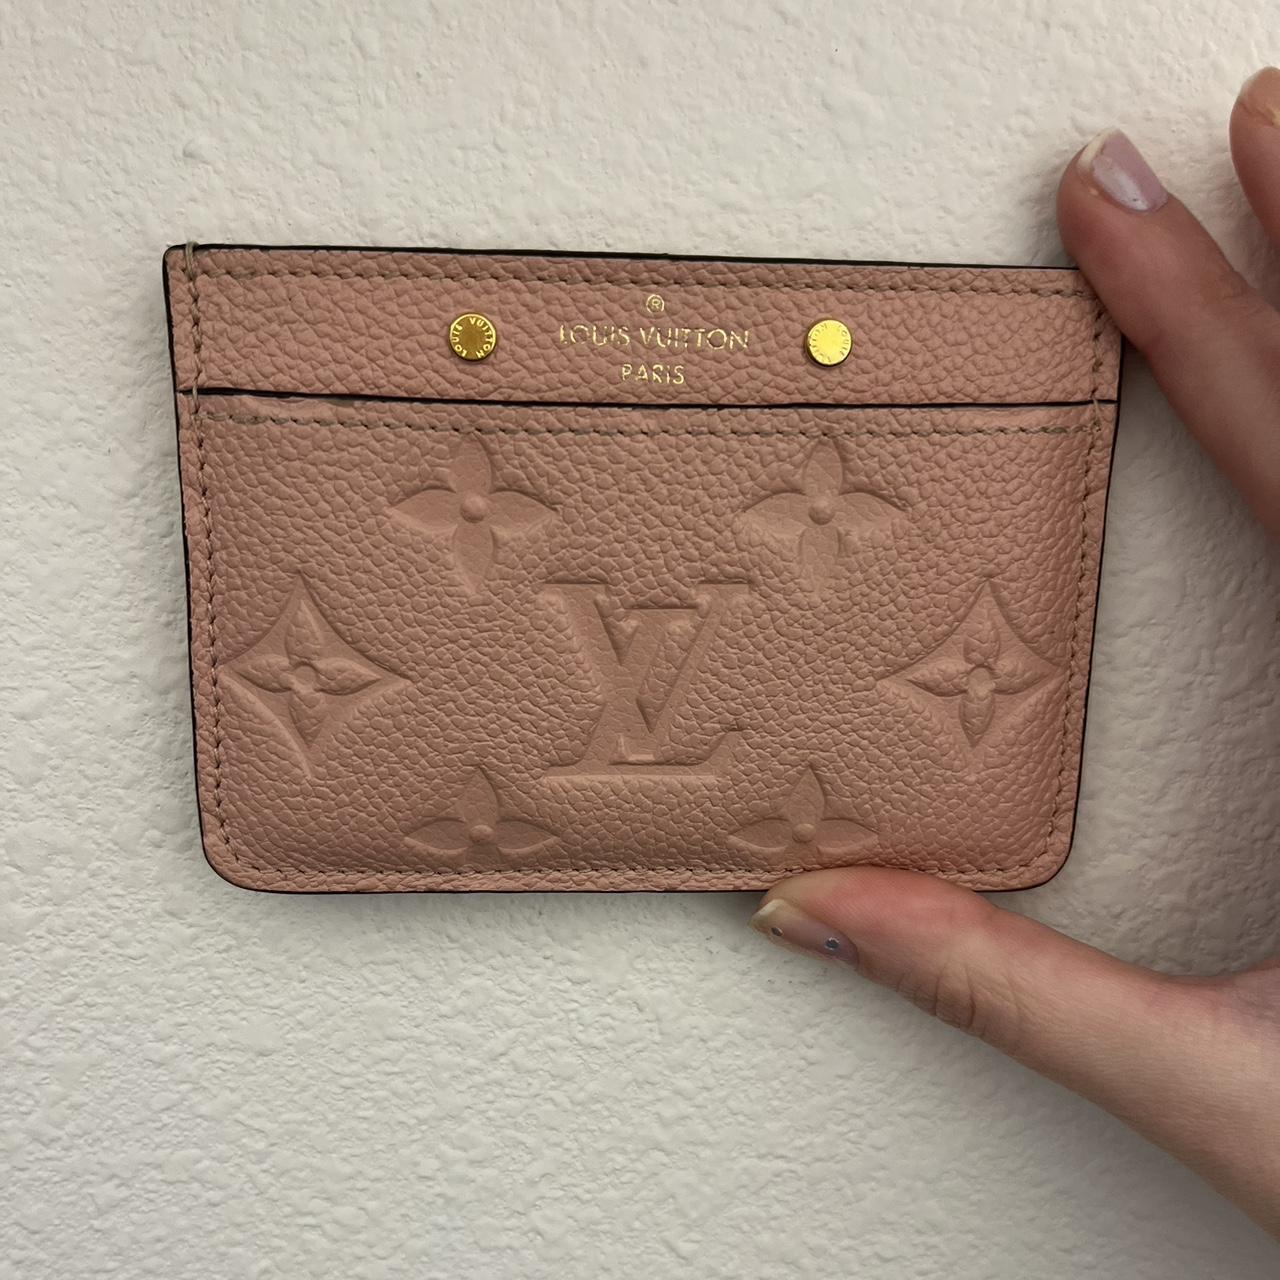 Louis Vuitton card holder. Bought 2 years ago so I - Depop